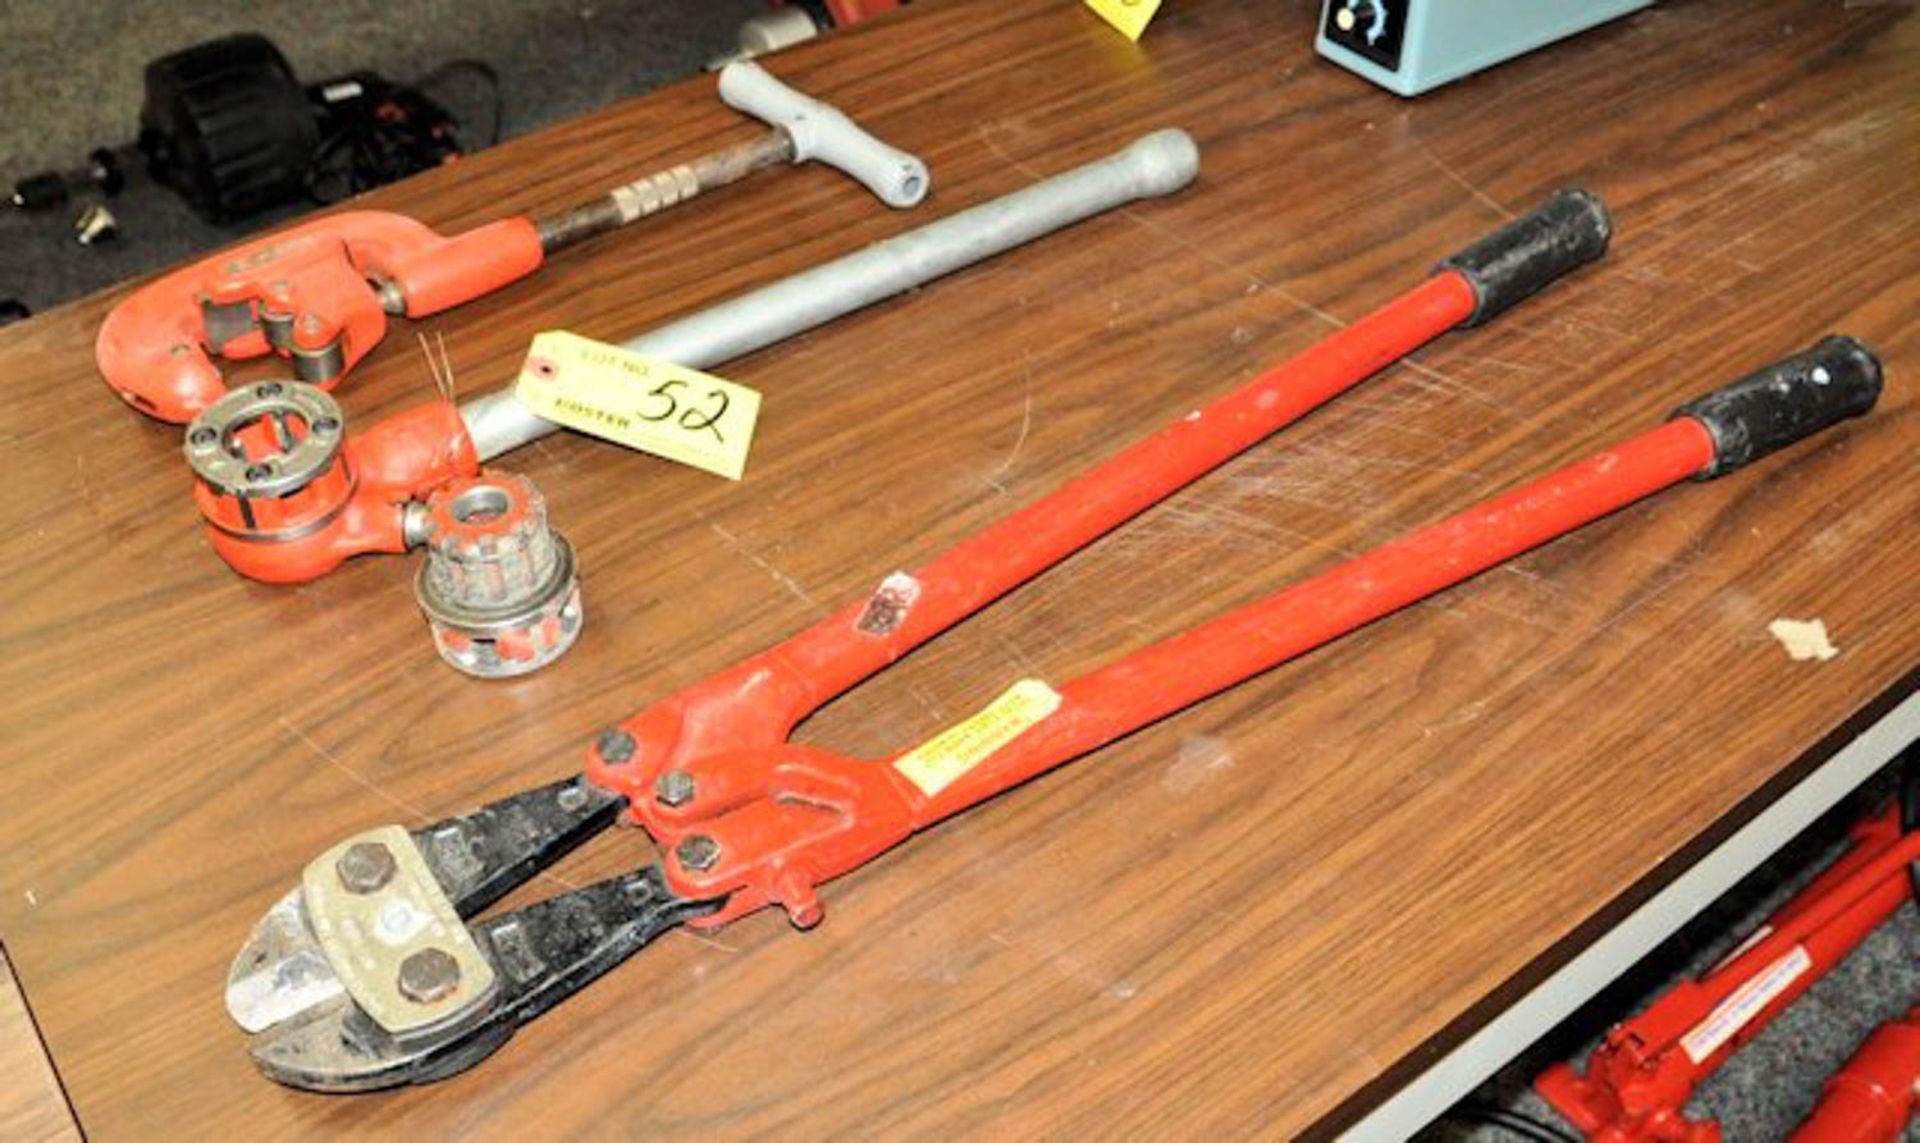 LOT OF (1) RIDGID PIPE CUTTER, (1) RIDGID DIE HOLDER AND (1) PAIR BOLT CUTTERS